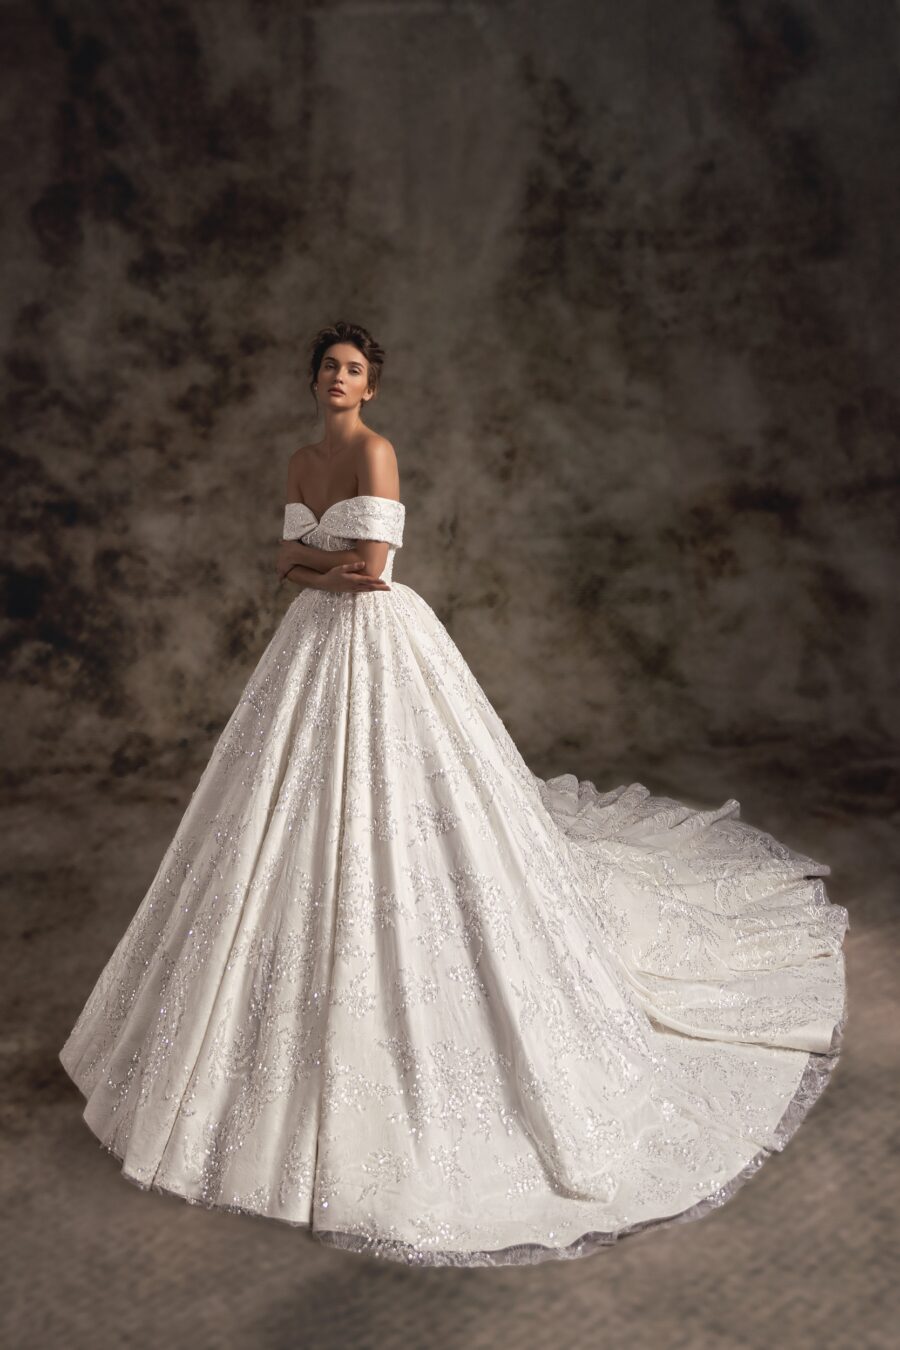 Opera 1 wedding dress by woná concept from notte d'opera collection